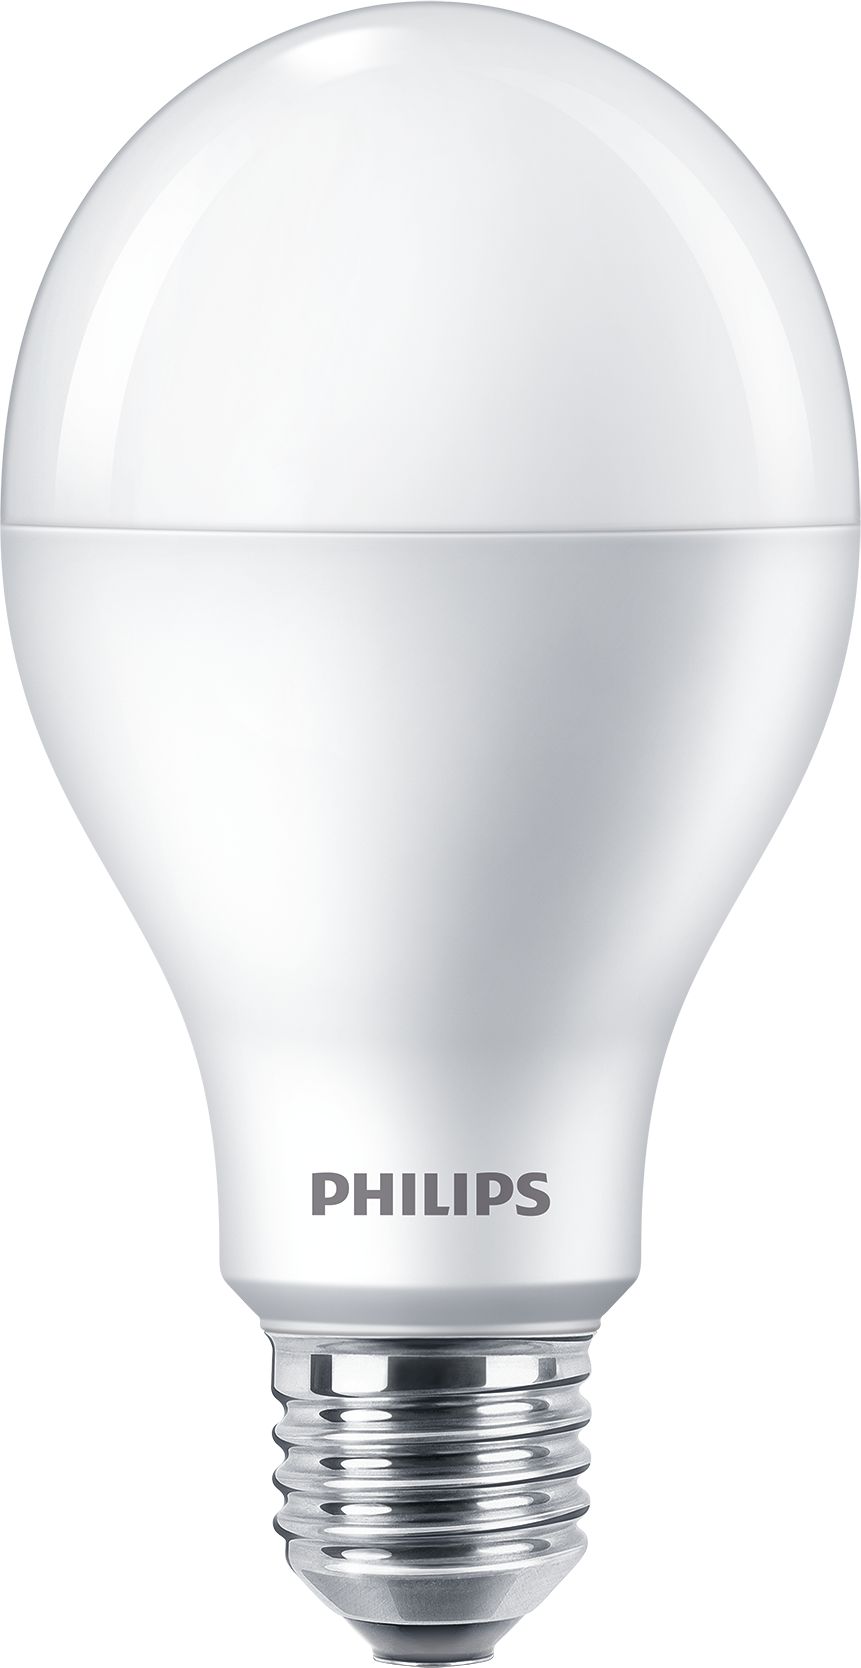 Armstrong Margaret Mitchell uitzondering Essential LED bulbs | 6979537 | Philips lighting